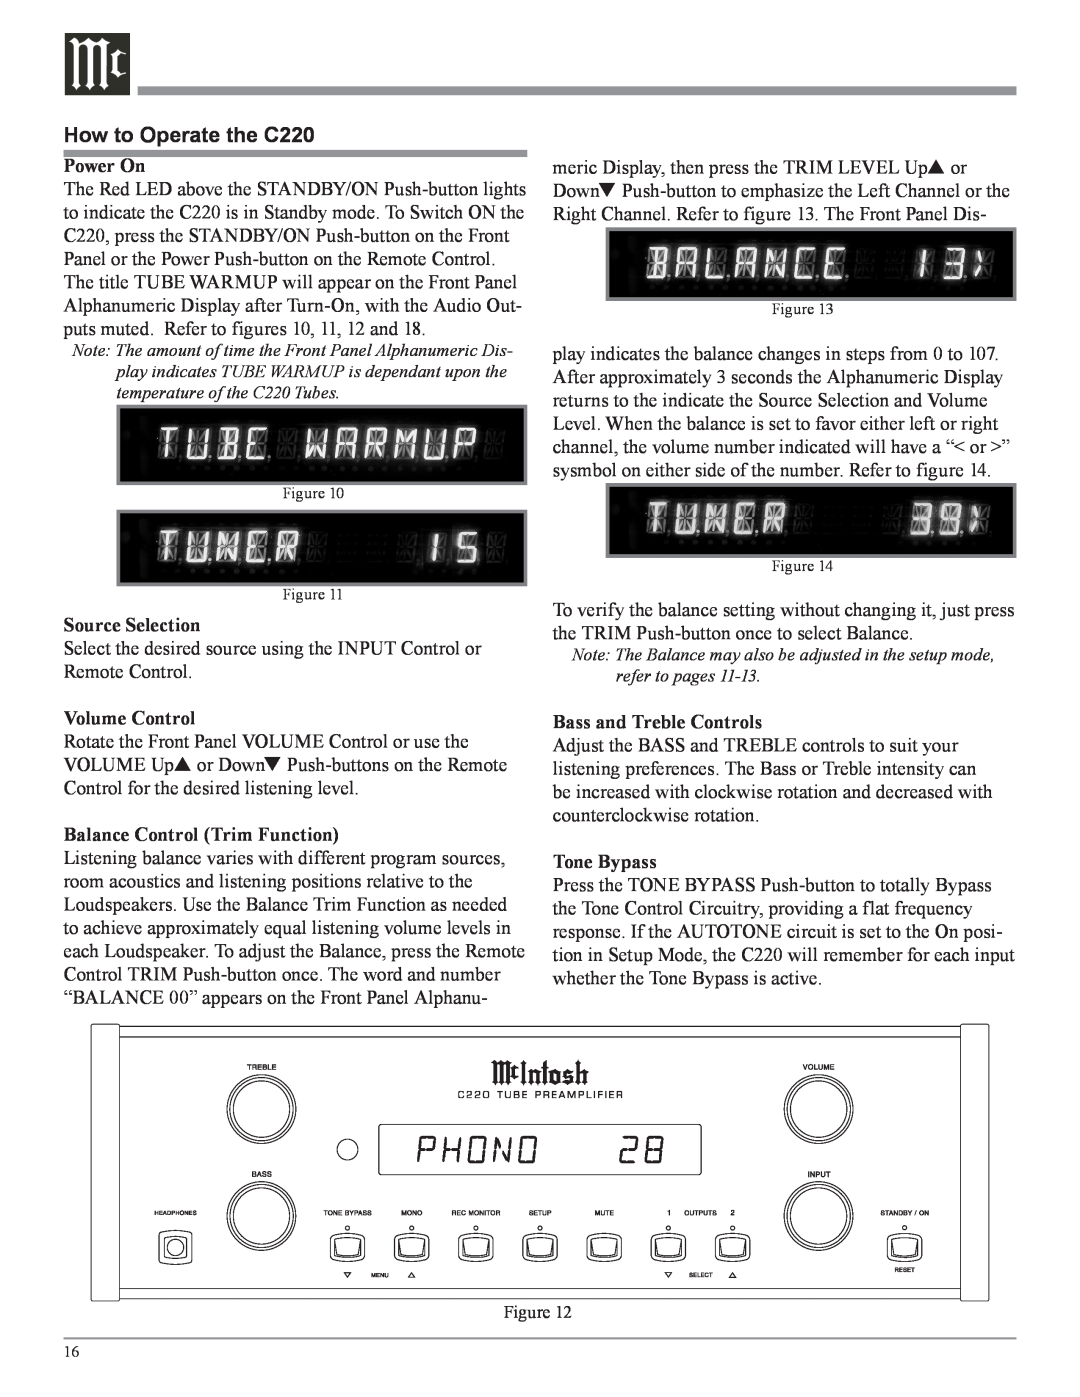 McIntosh owner manual How to Operate the C220, Power On, Source Selection, Volume Control, Balance Control Trim Function 